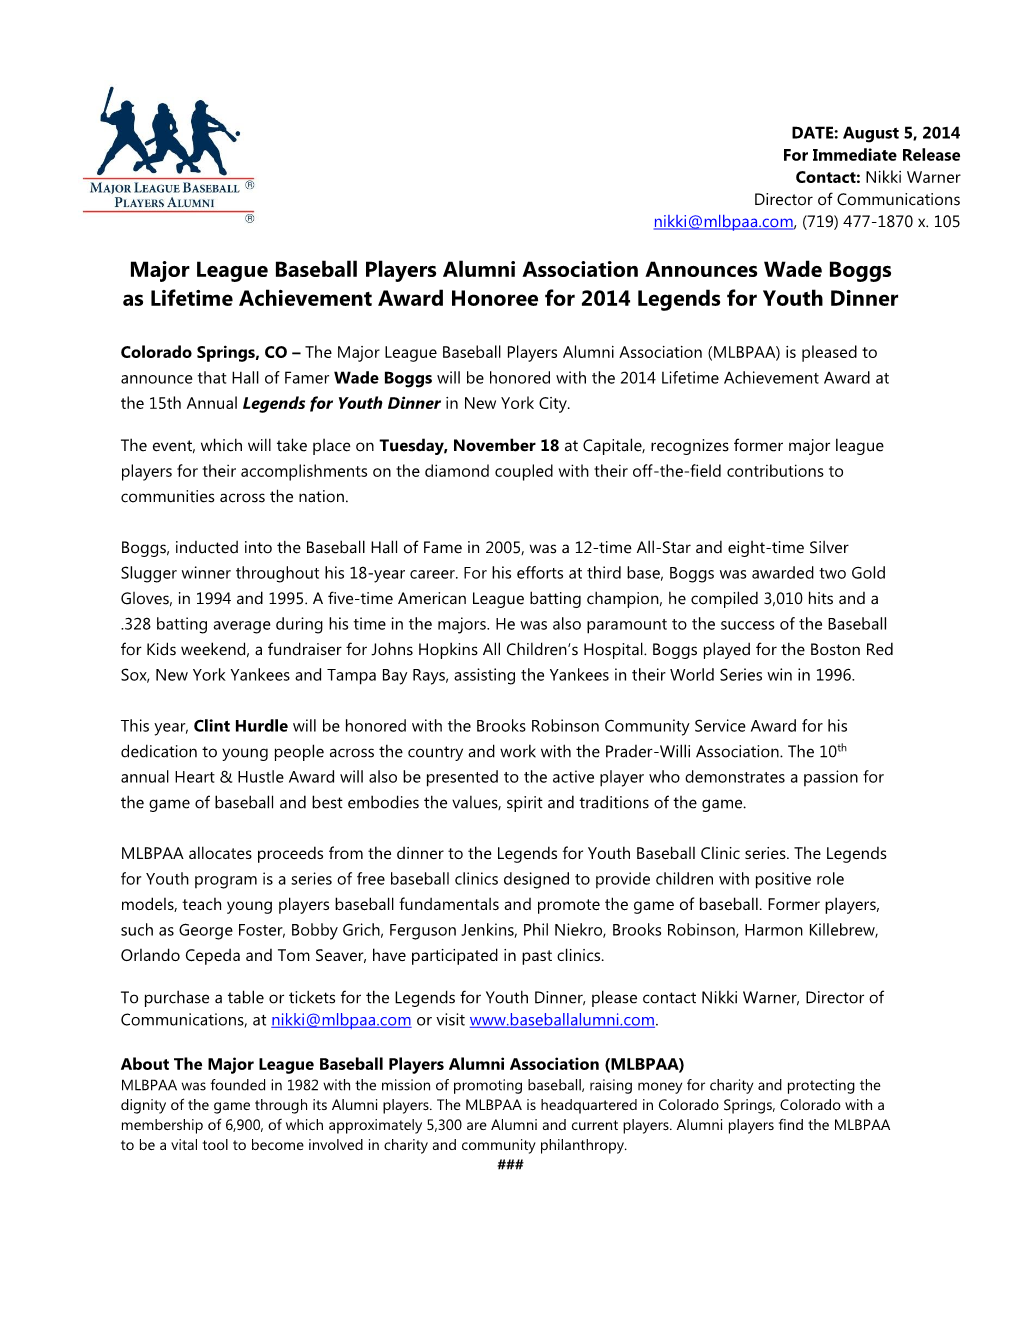 Major League Baseball Players Alumni Association Announces Wade Boggs As Lifetime Achievement Award Honoree for 2014 Legends for Youth Dinner